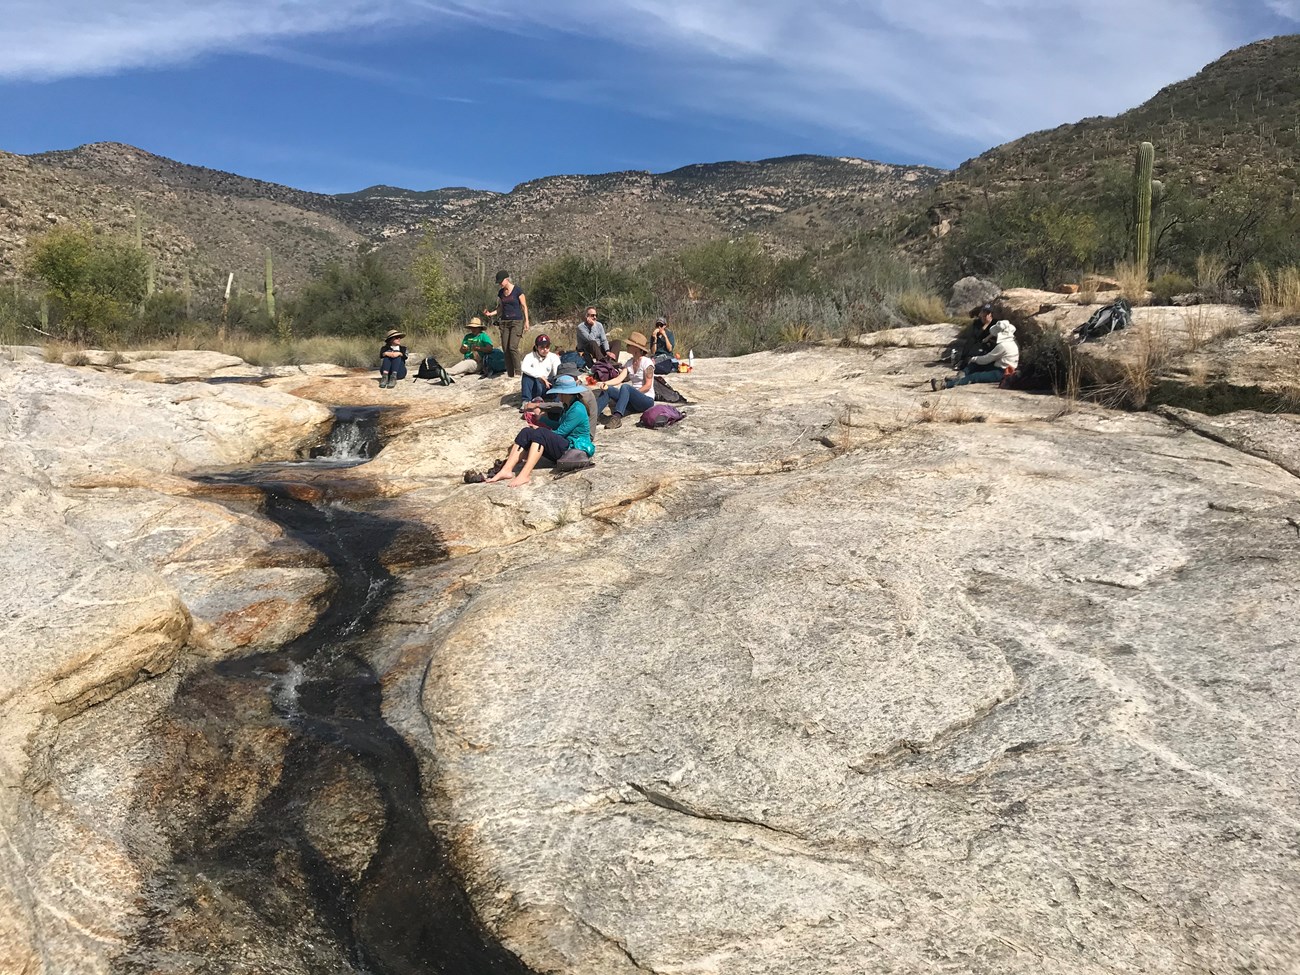 Volunteers resting on a bedrock. To their right is a stream of water flowing.